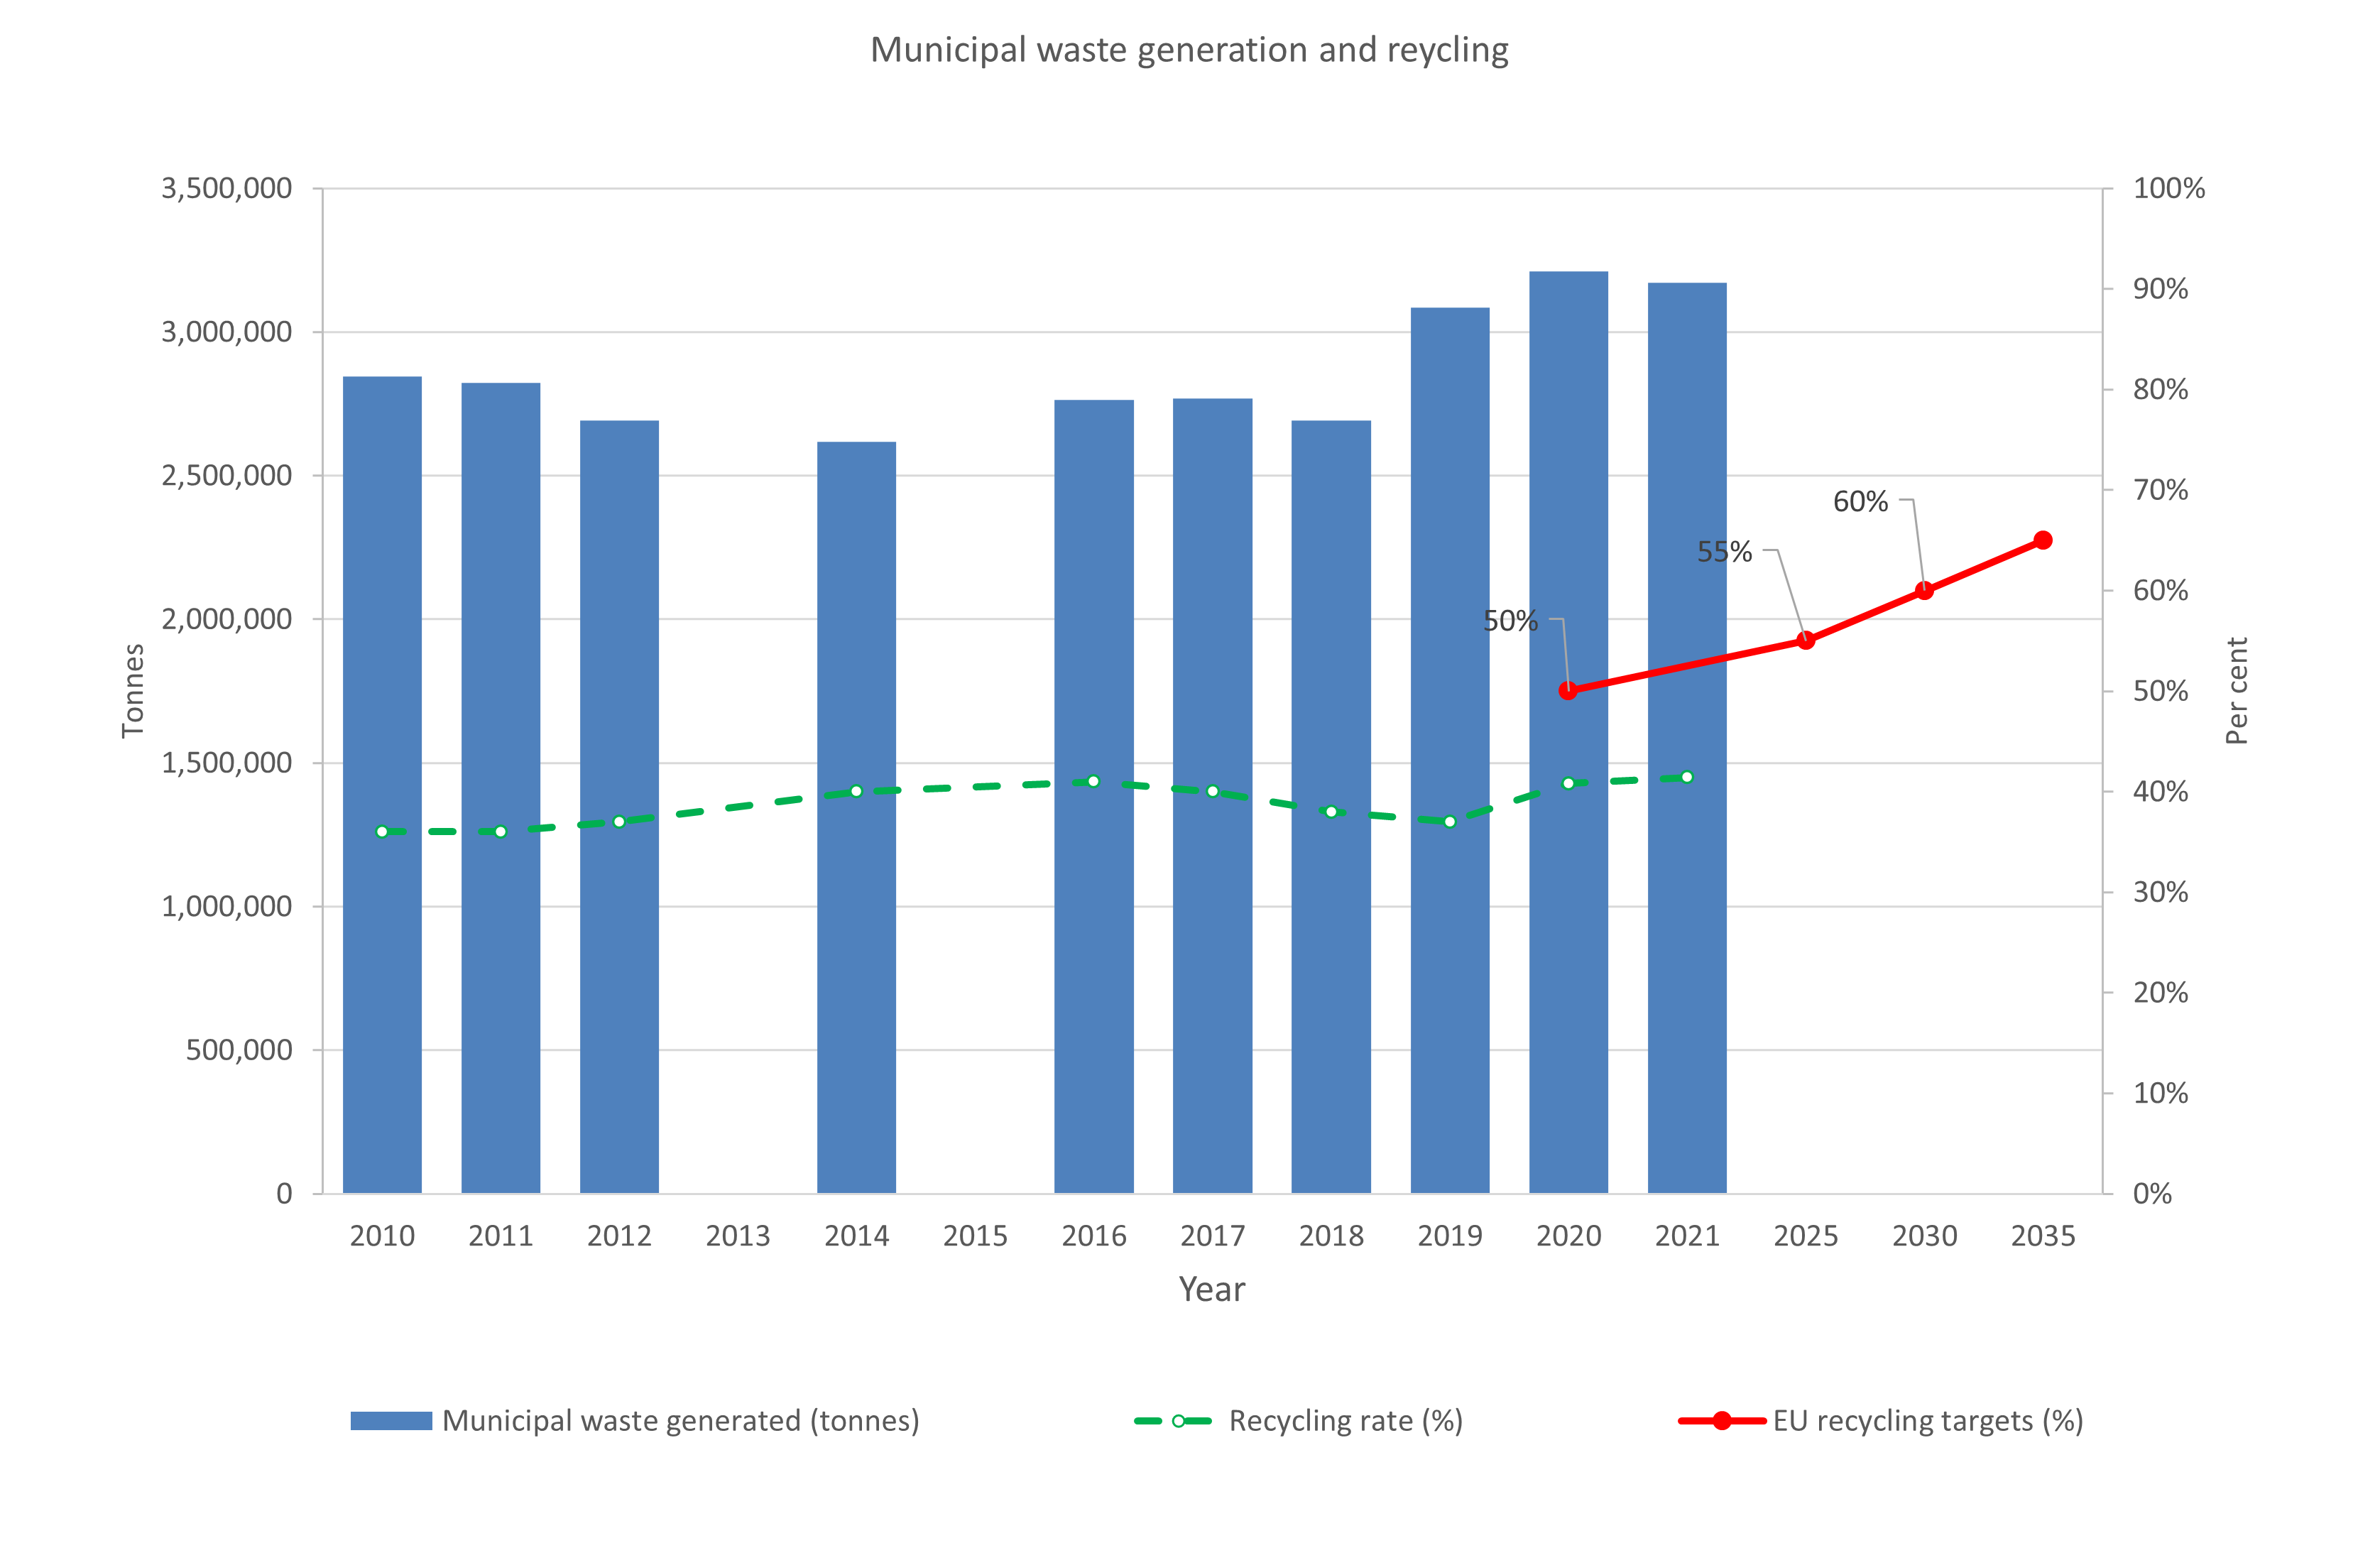 A graph showing the municipal waste generated from 2010 to 2035